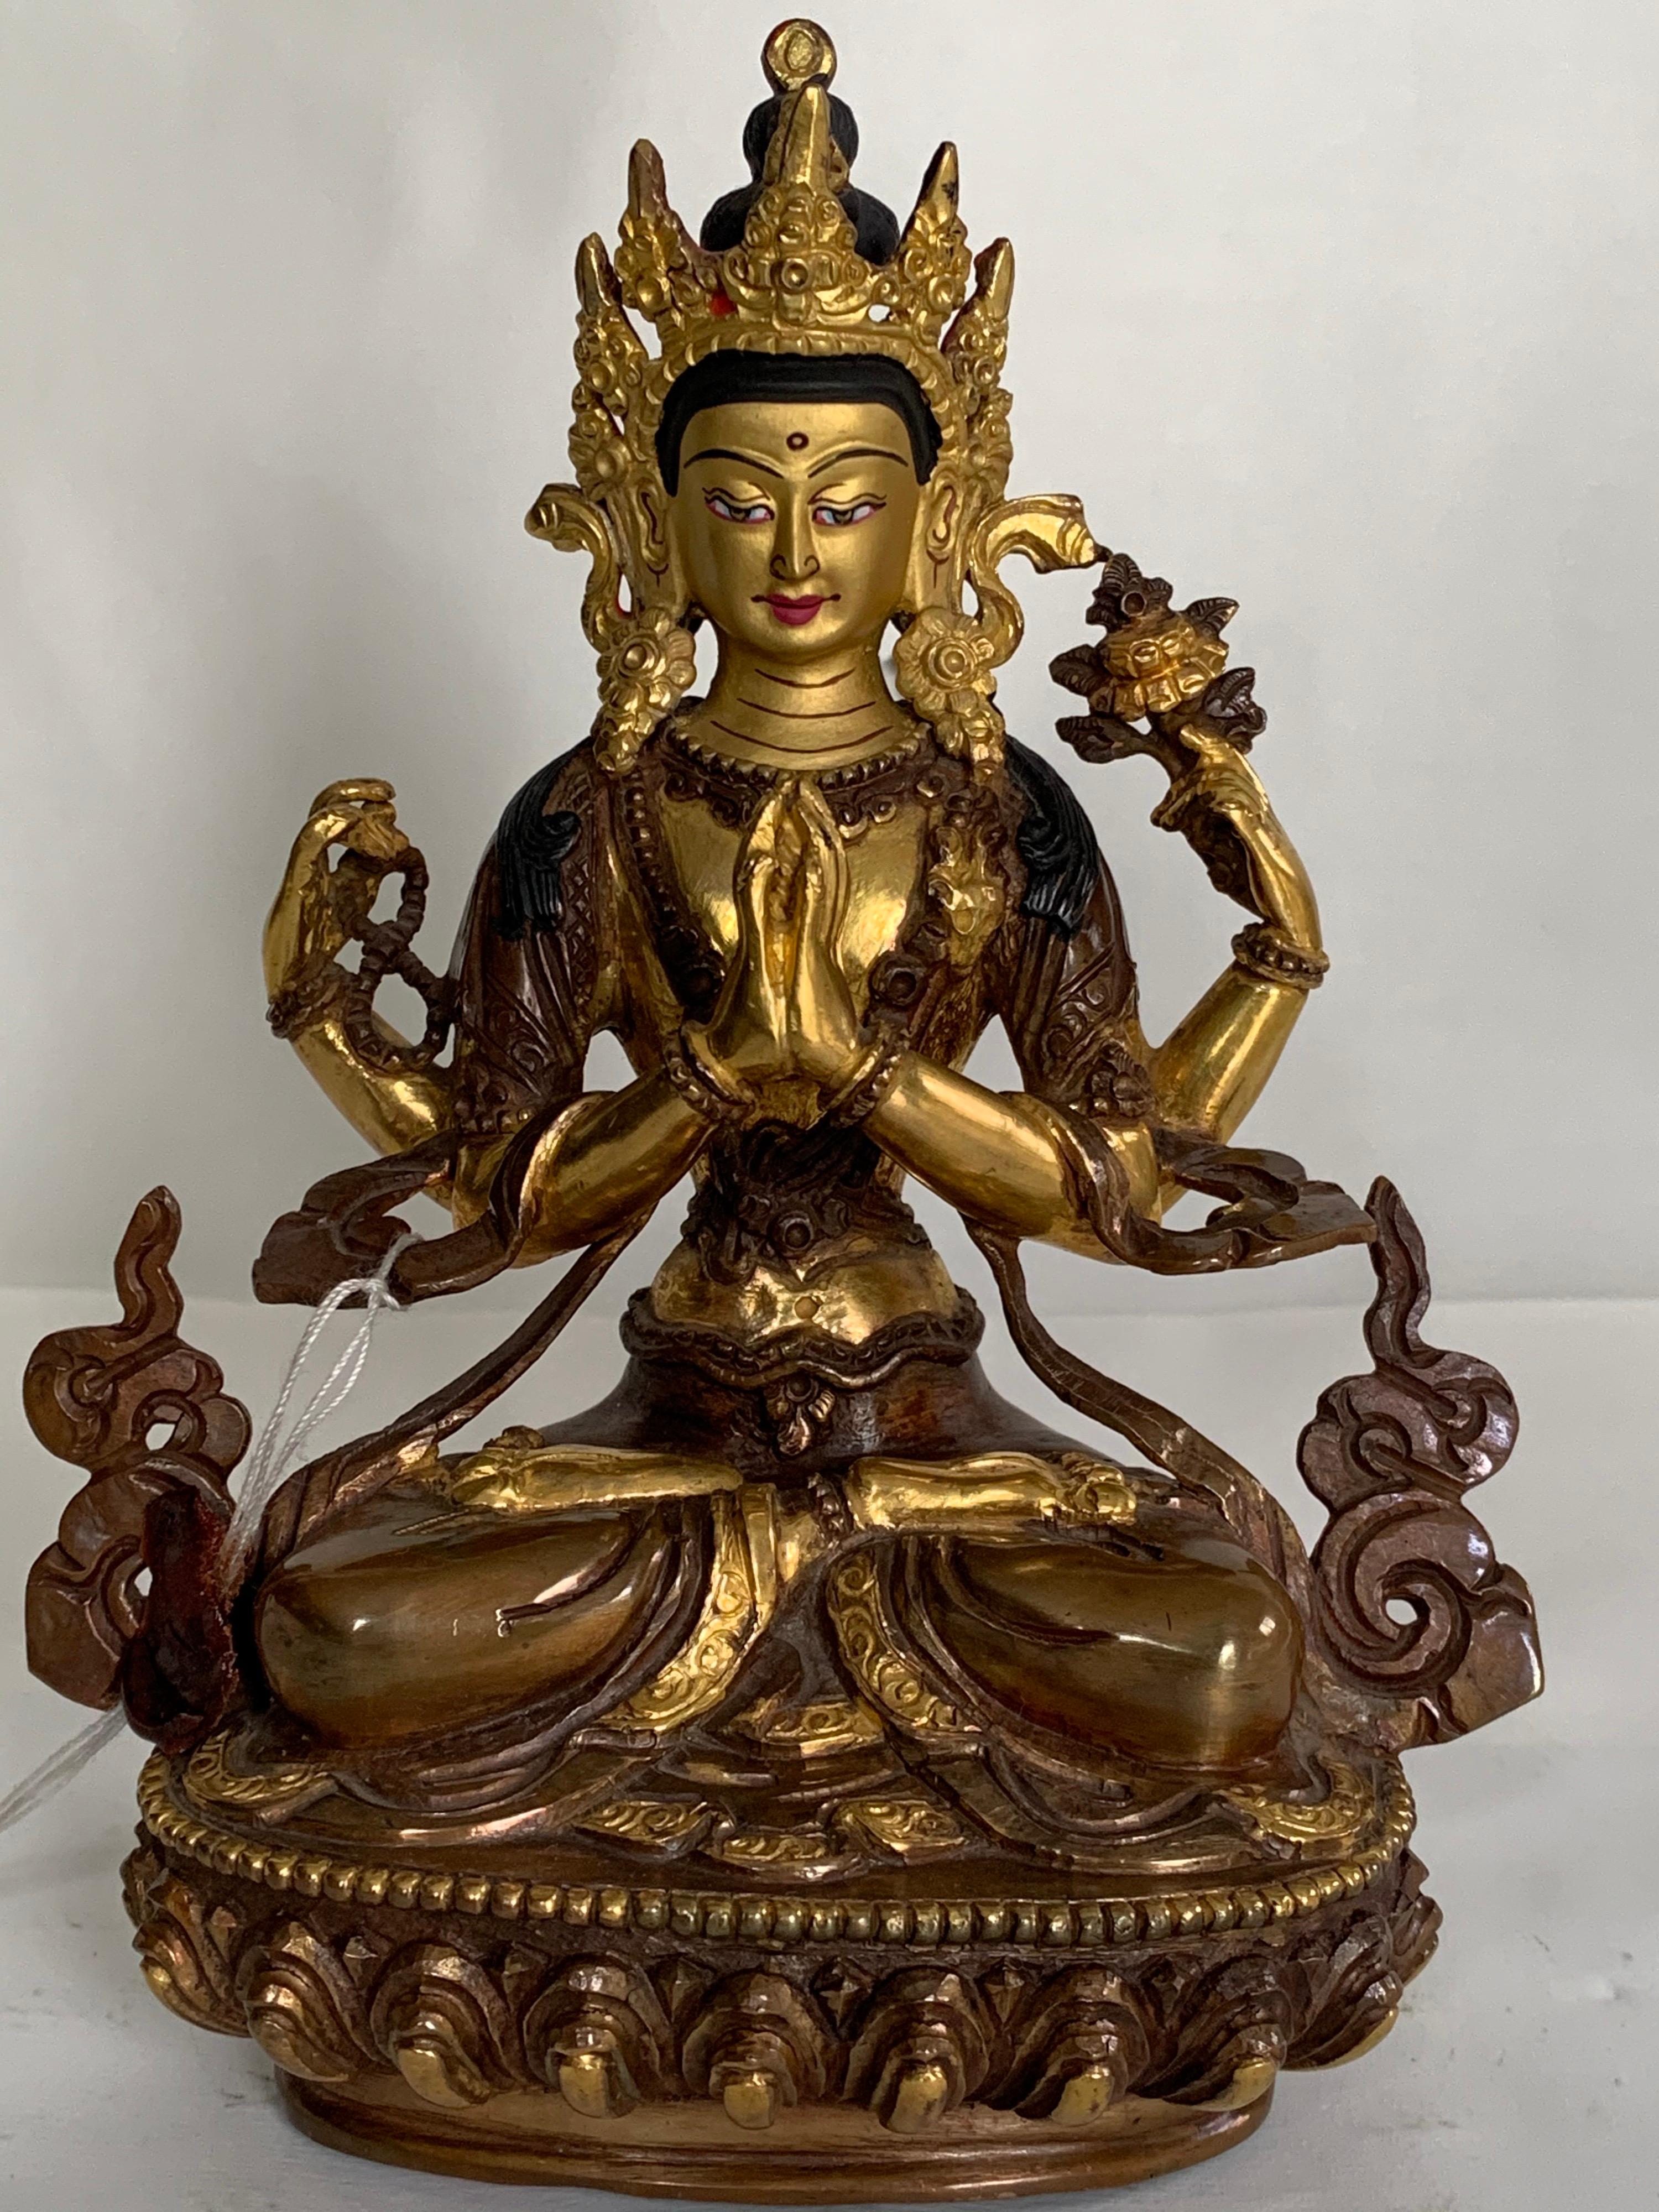 Unknown Figurative Sculpture - Chengrishi Statue 6 Inch with 24K Gold Handcrafted by Lost Wax Process